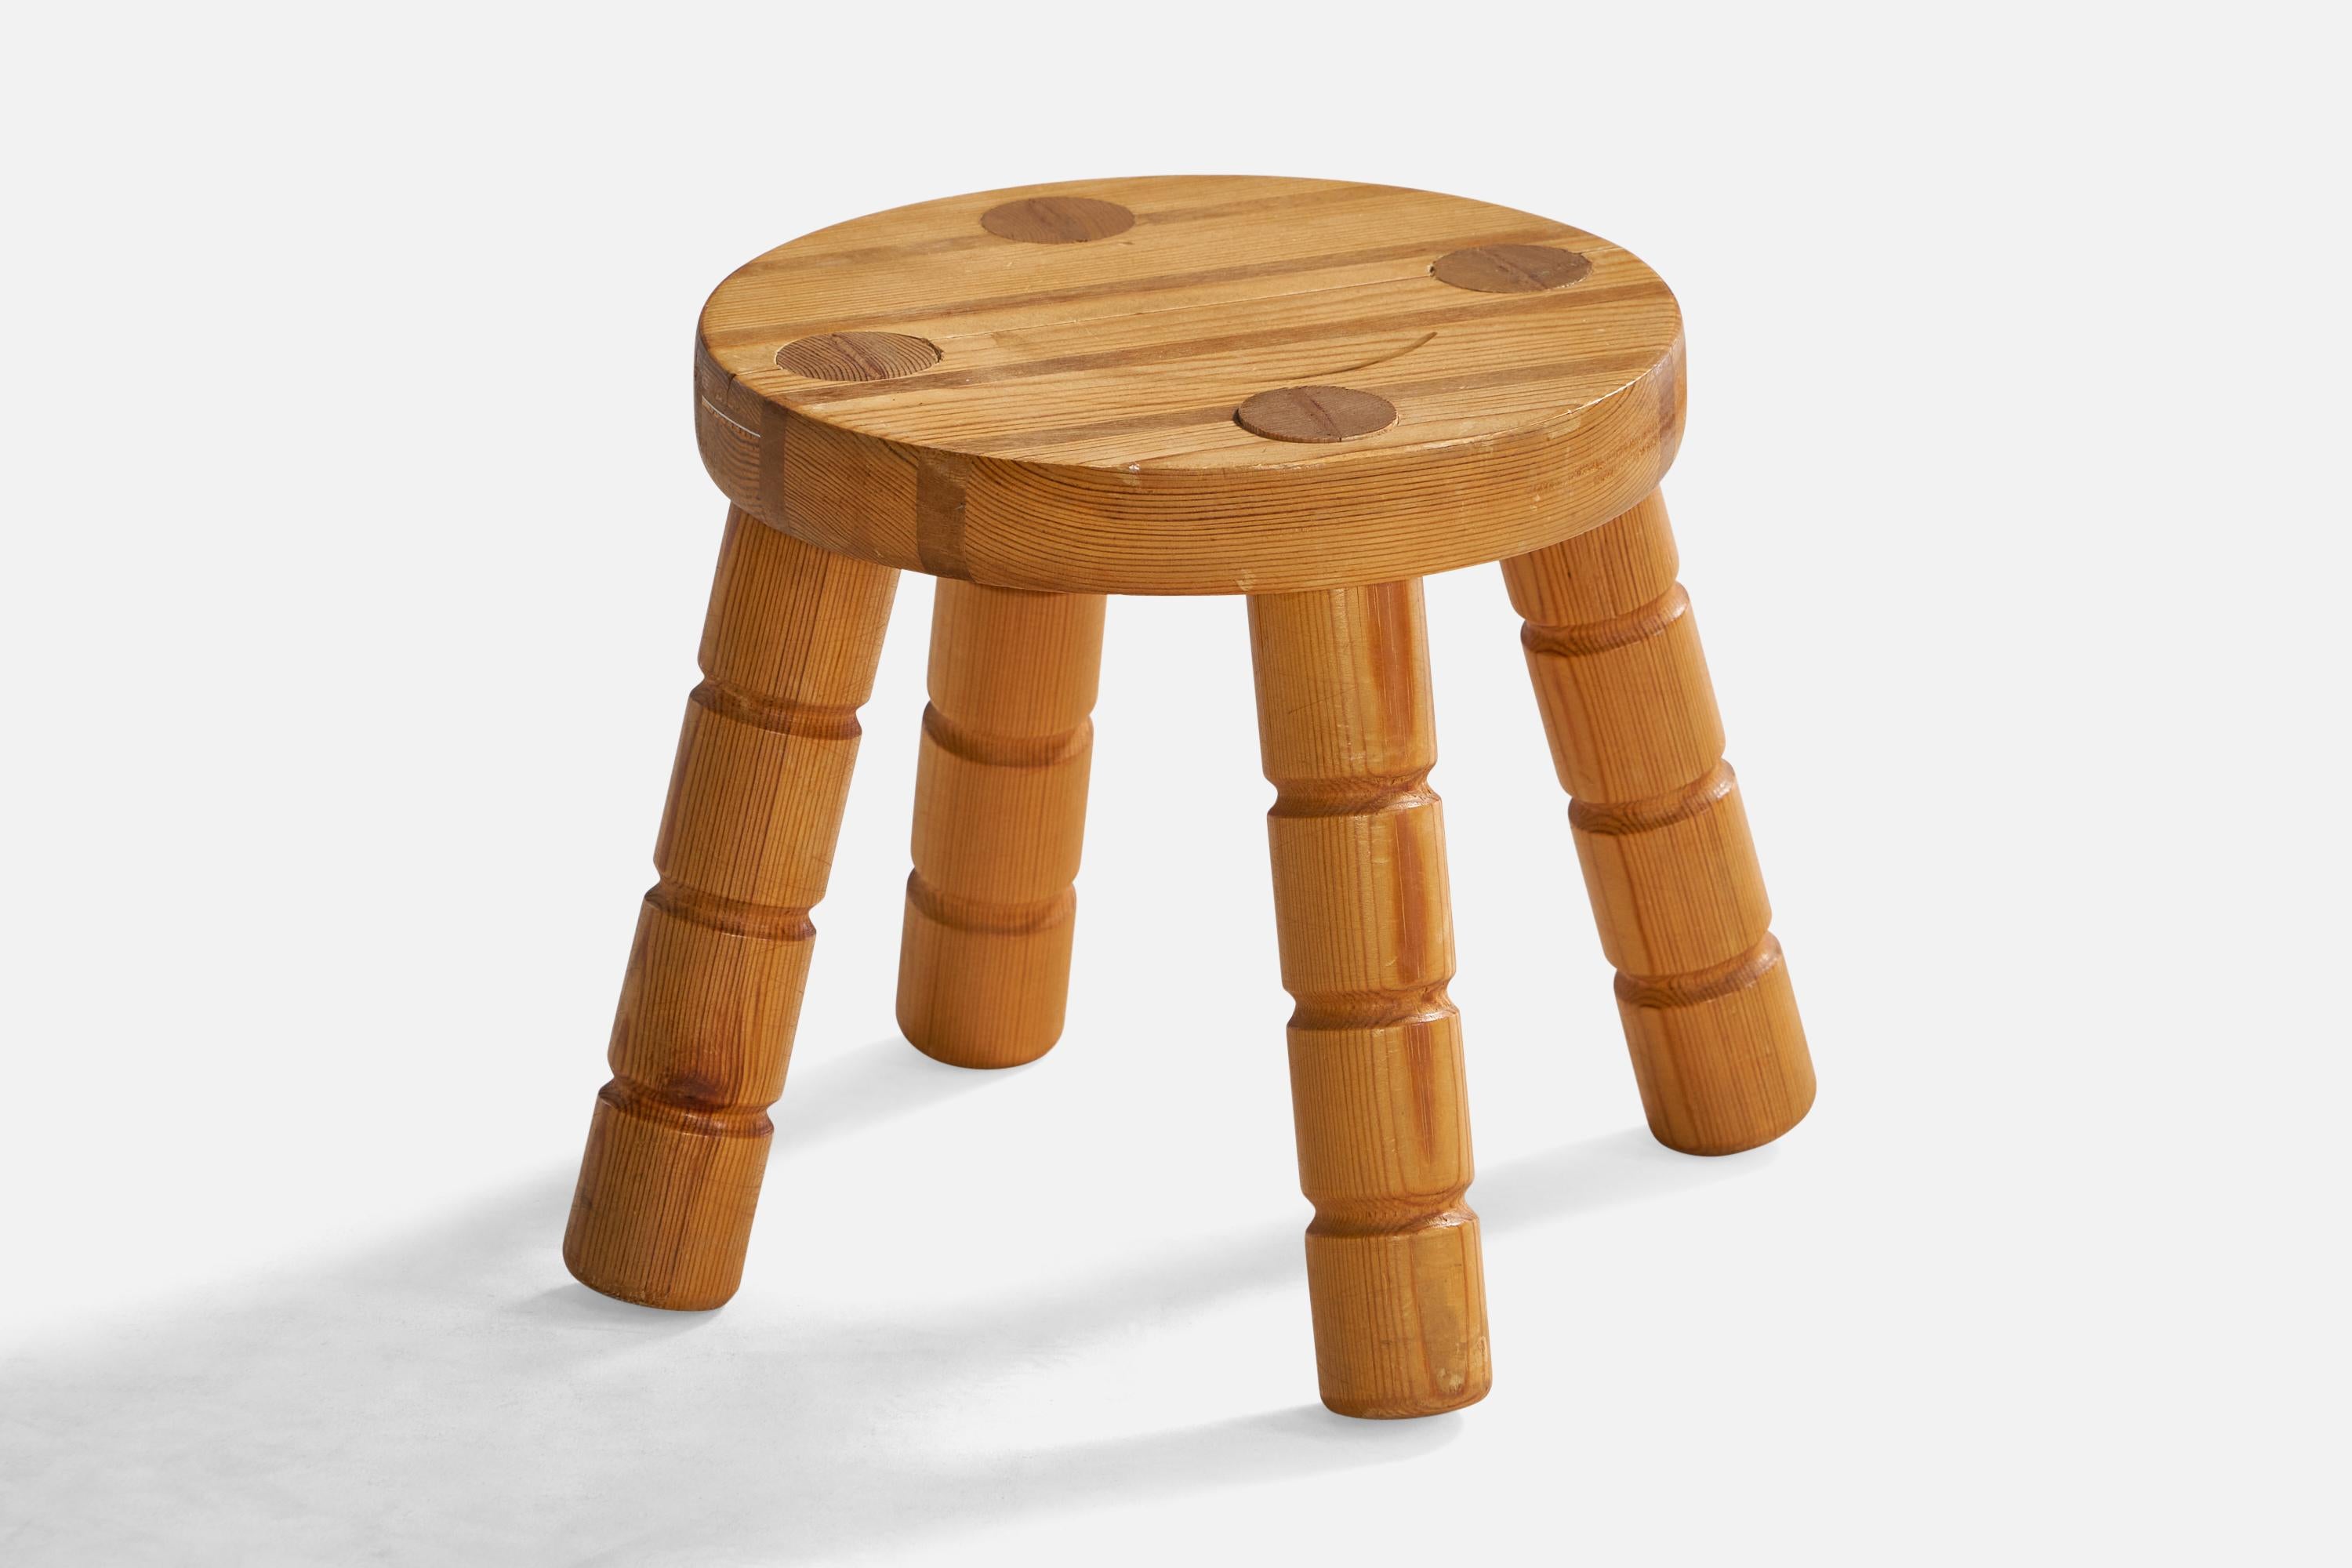 A pine stool designed and produced in Sweden, dated 1980.

Seat height: 9.3”